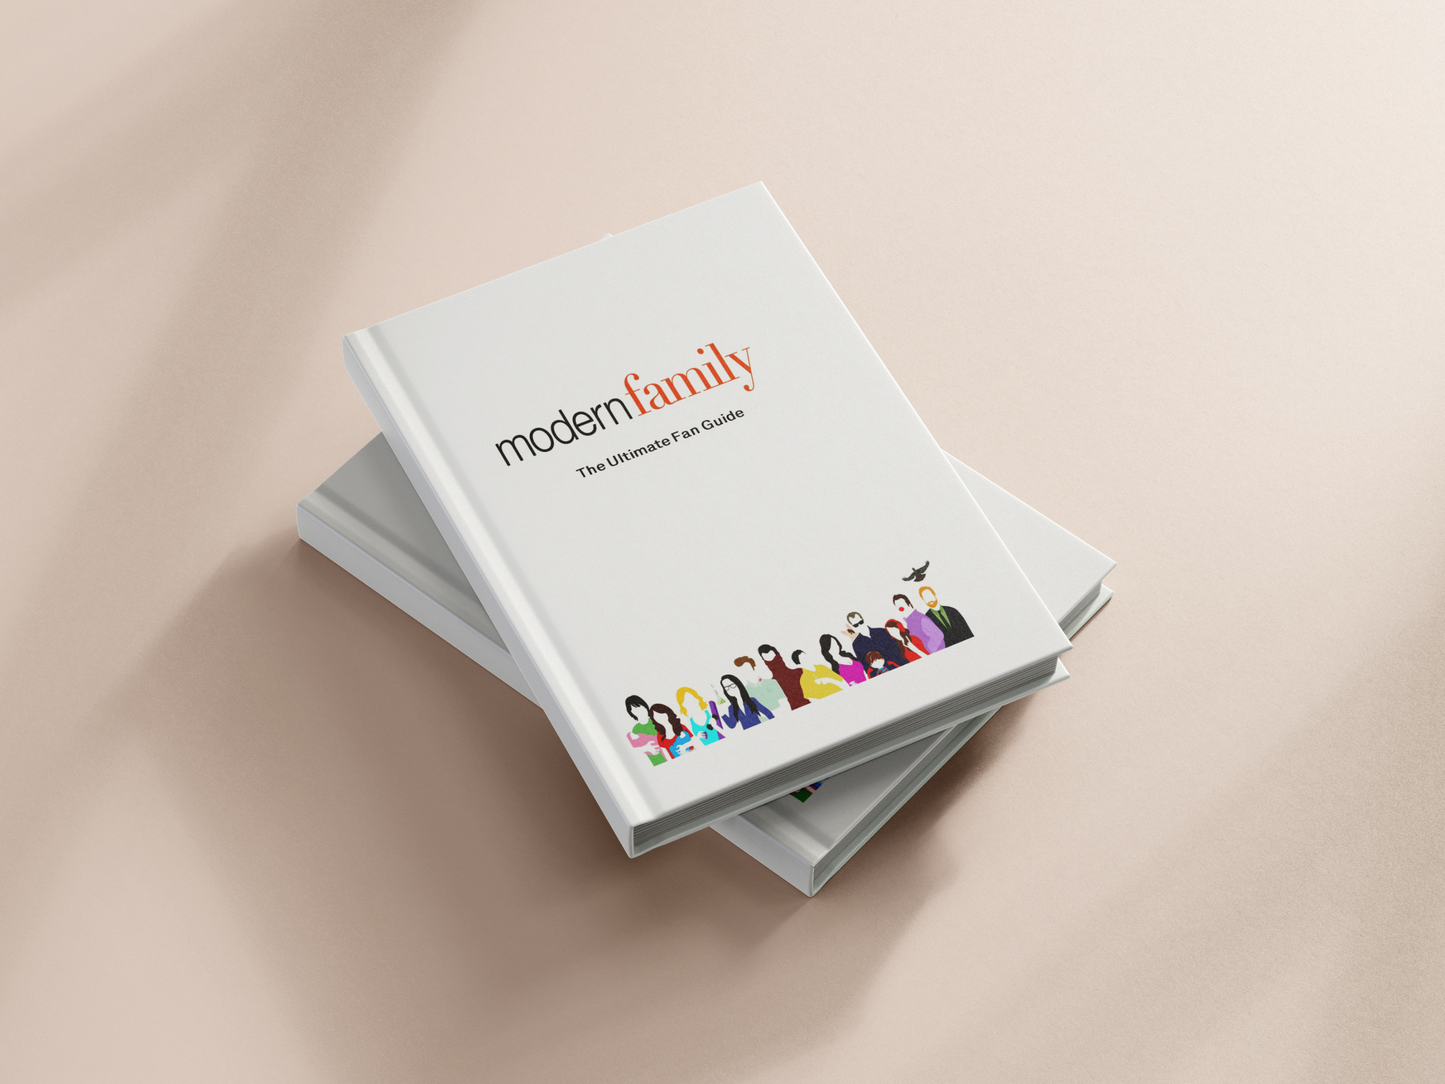 Ultimate Guide to Modern Family: Fan-Made Collectible Book - Relive the Pritchett Family Adventures!